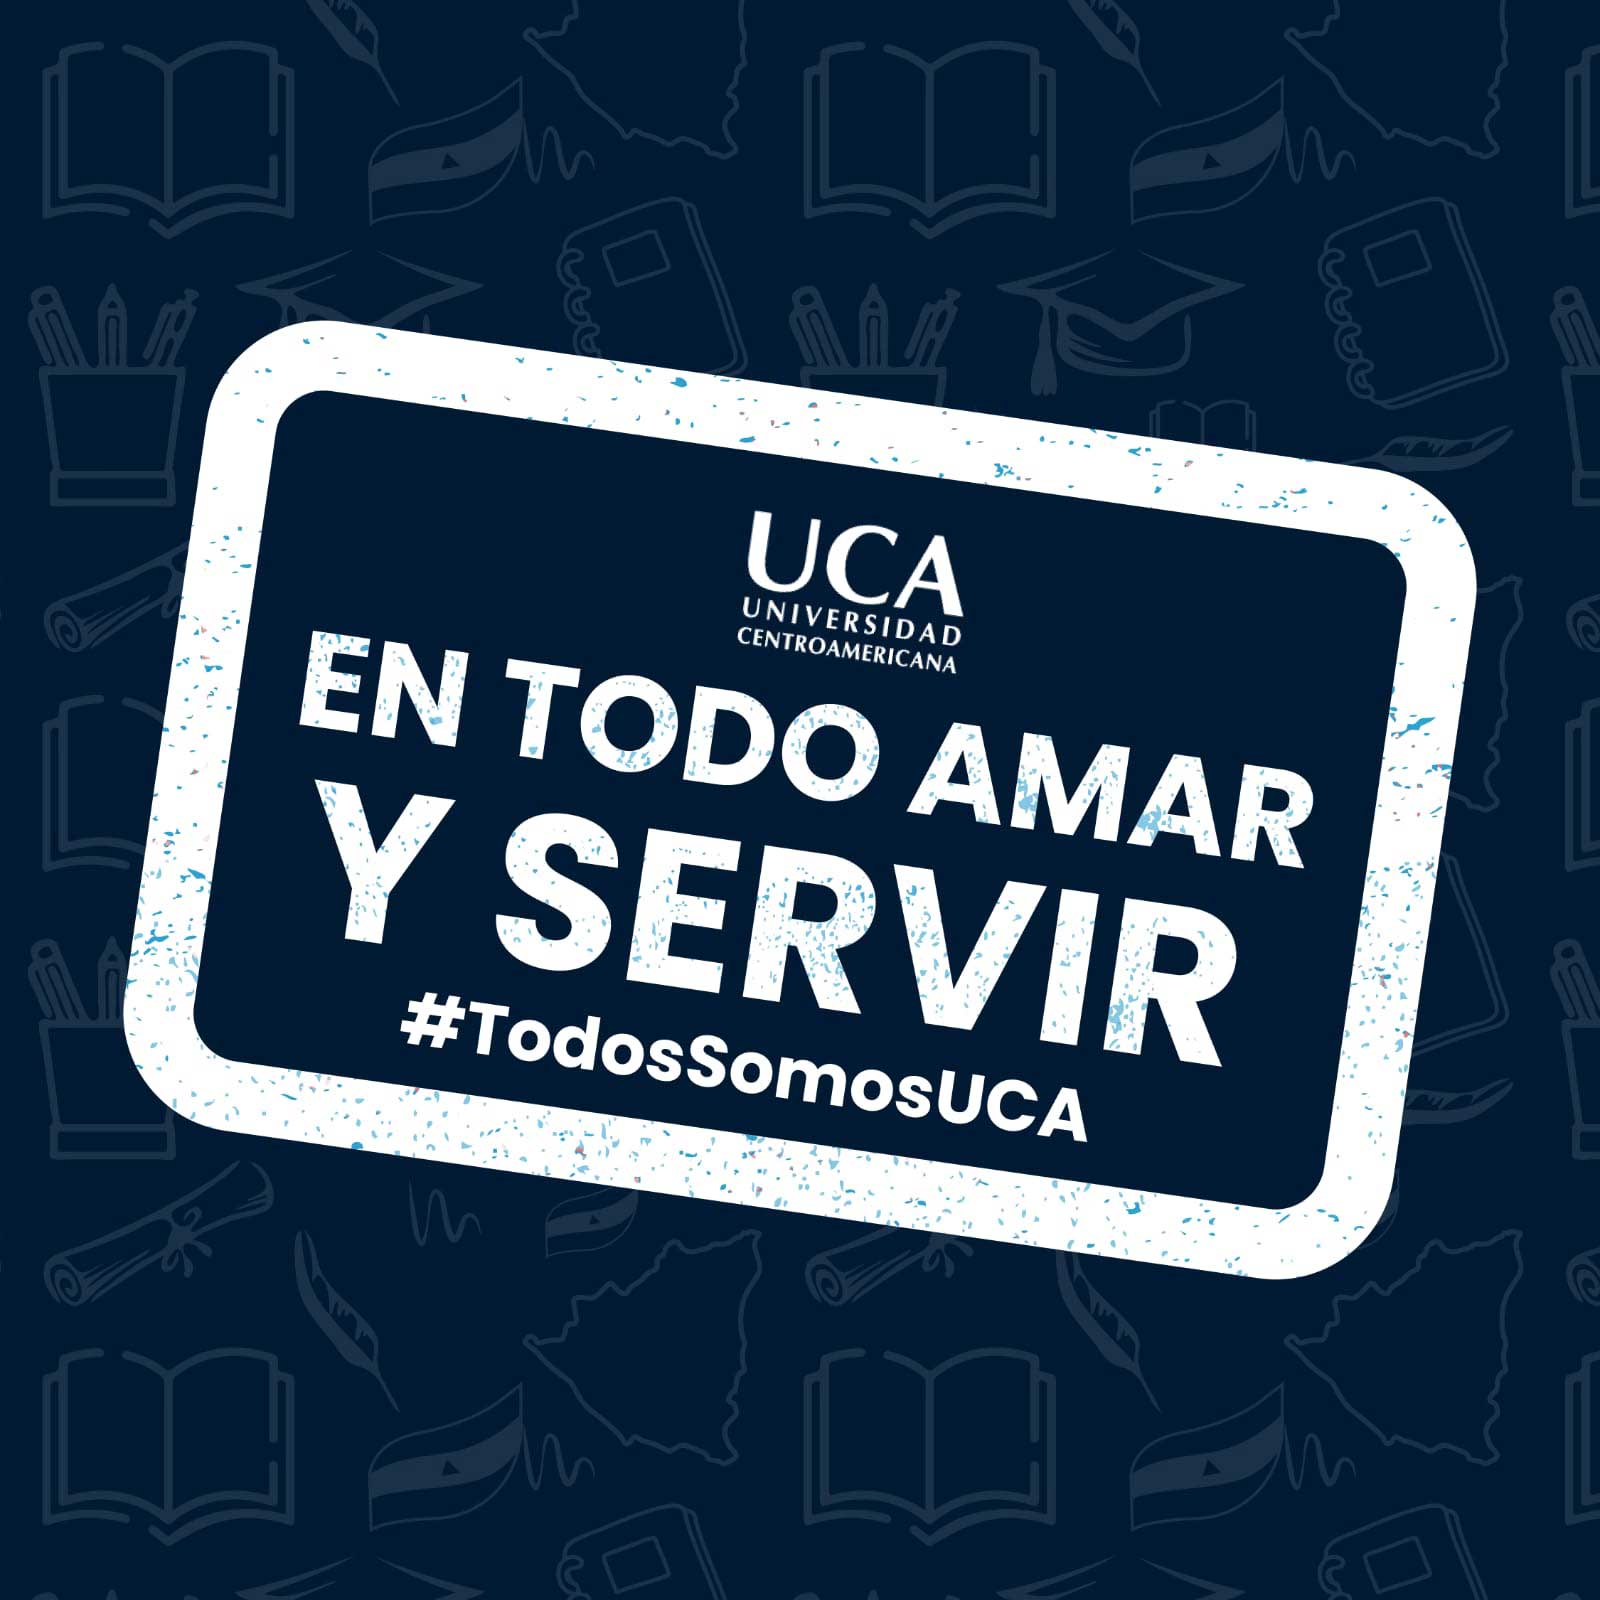 Love and serve in all things - UCS Universidad Centroamericana - University of Central America